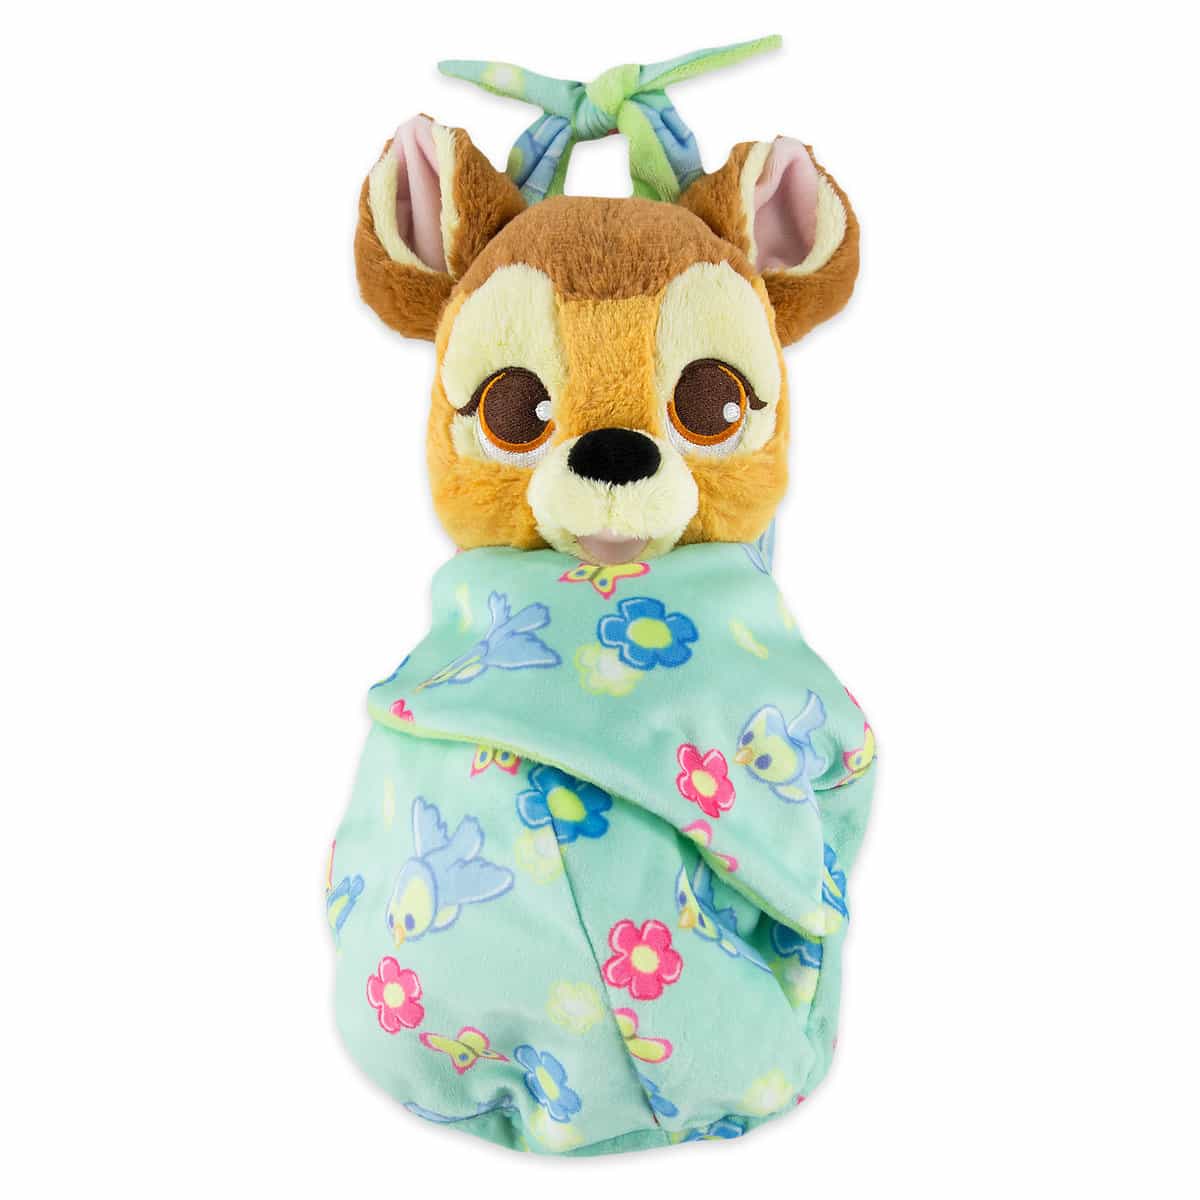 Disney's Babies Plush Collection Out 